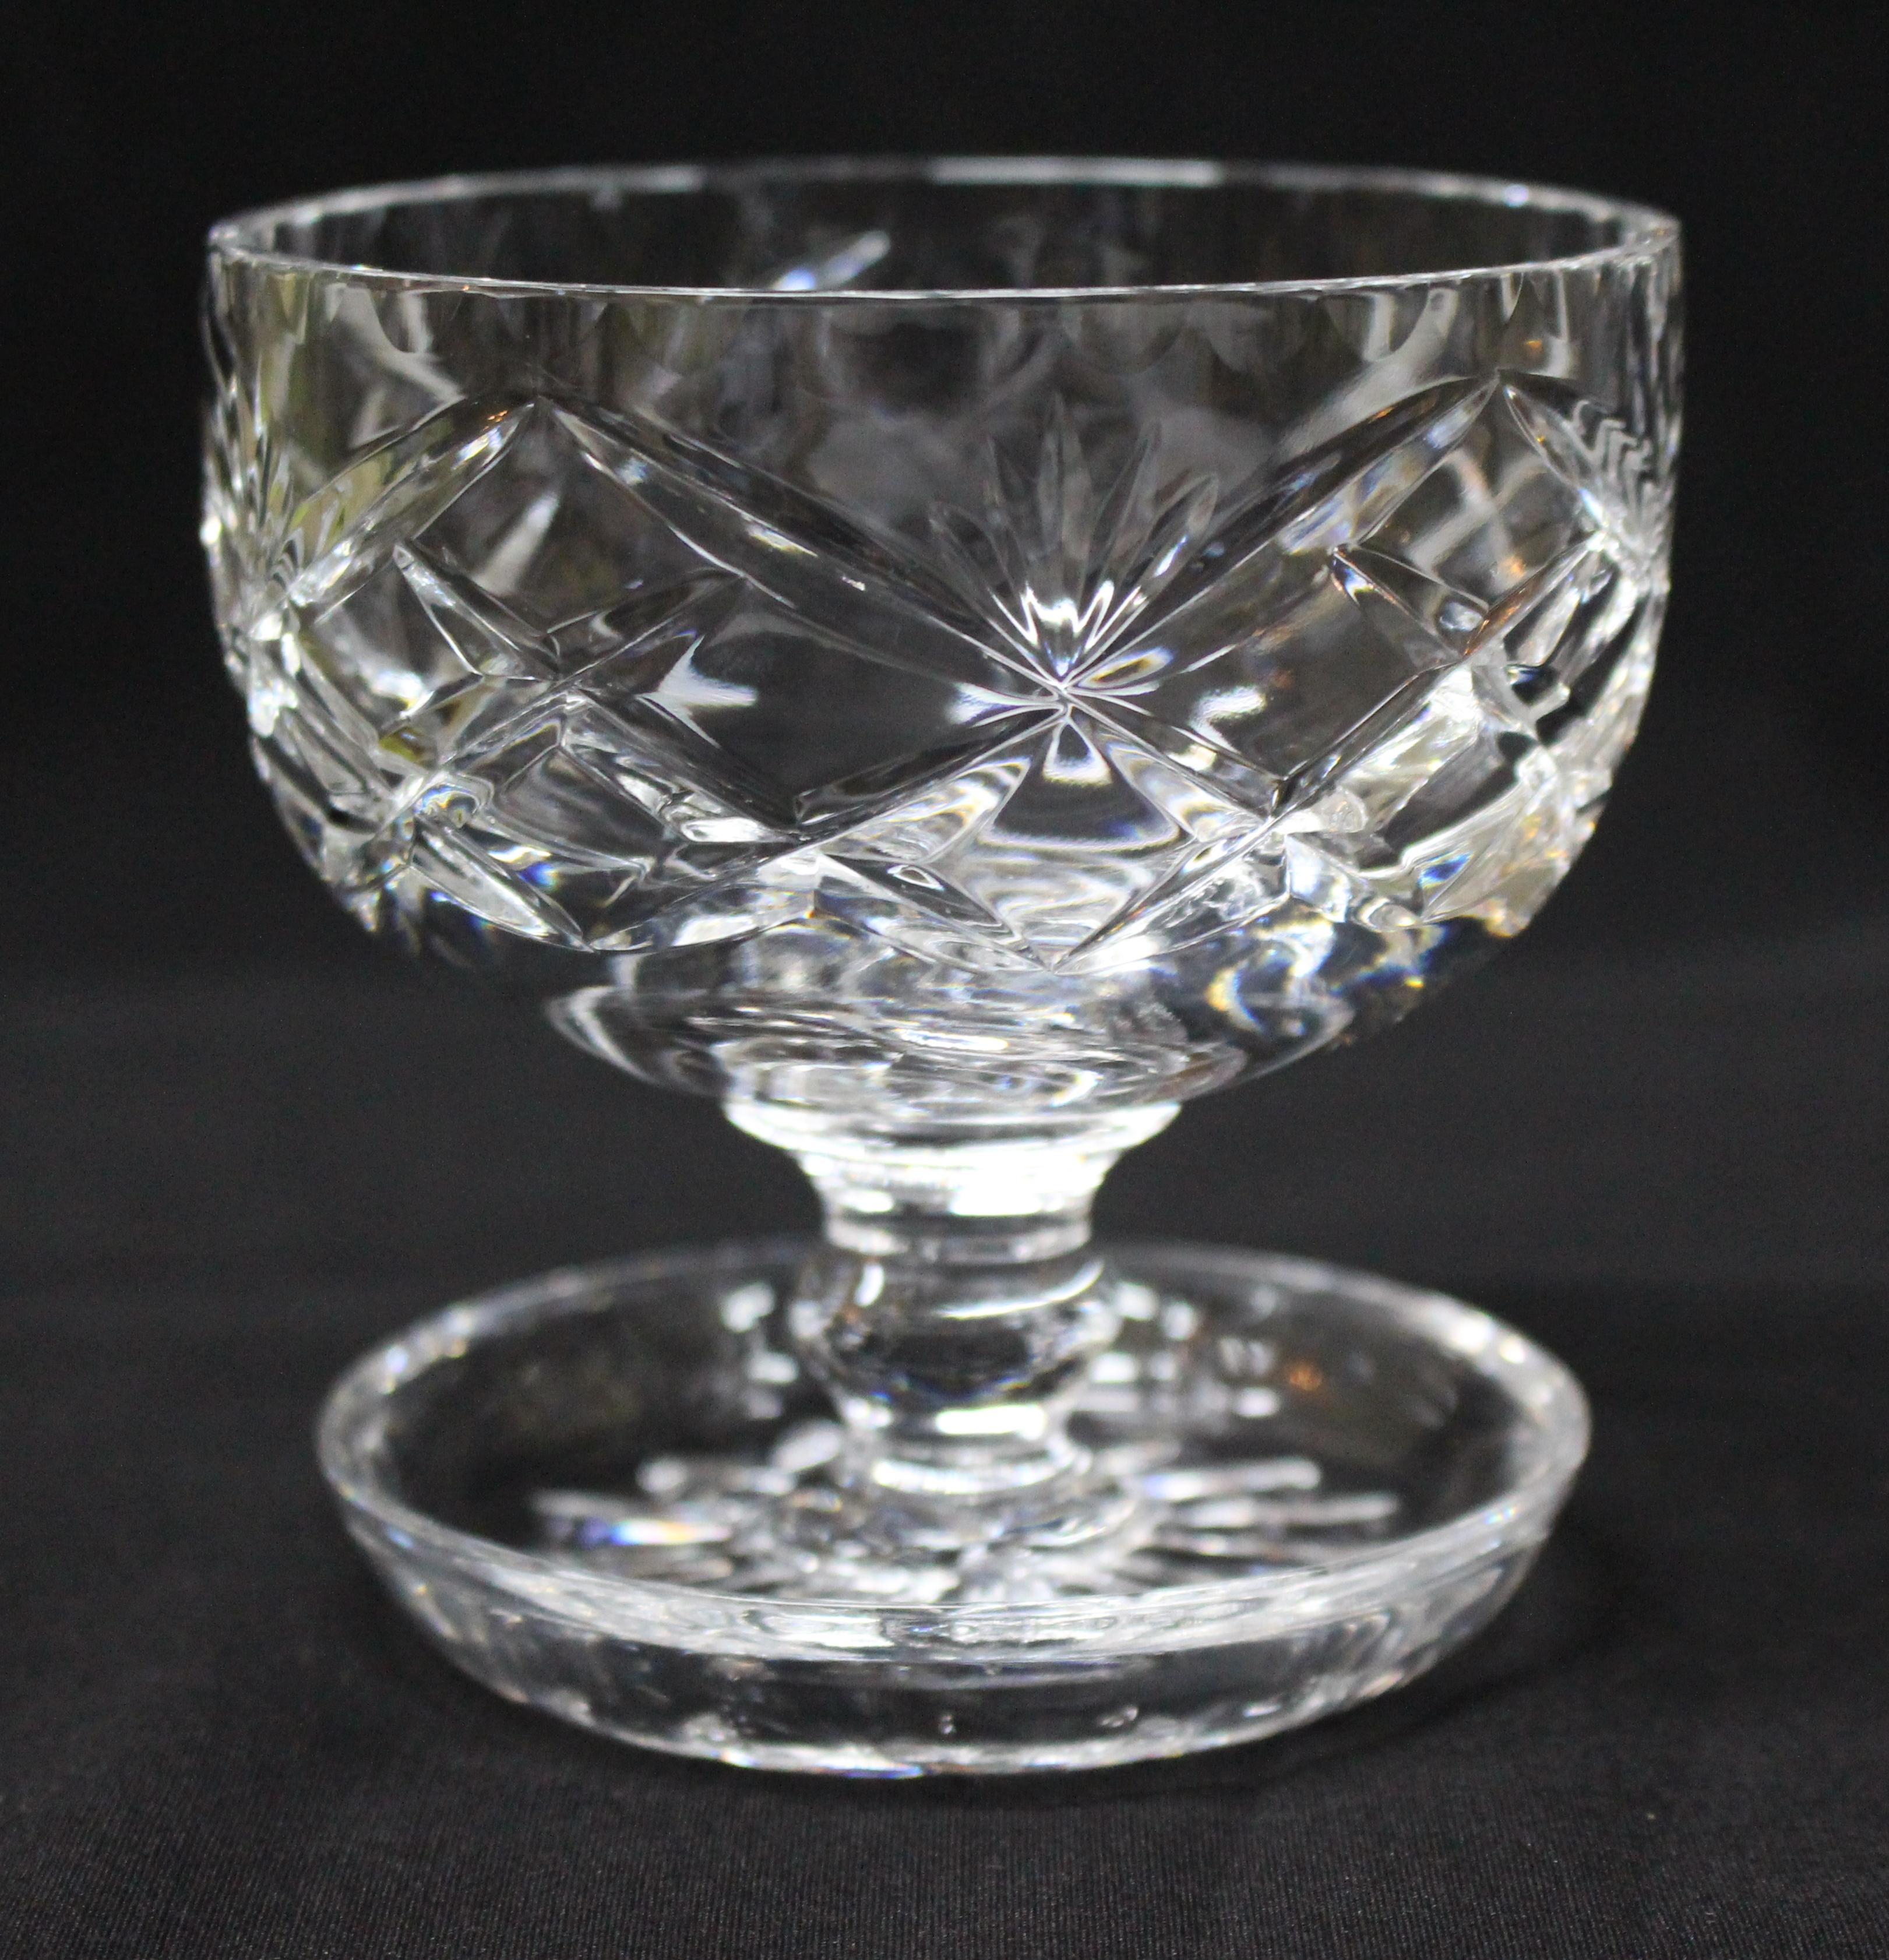 Period English, circa 1950
Origin Stourbridge
Type Sundae dishes
Set six
Measure: Top diameter 9.5 cm / 3 3/4 in
Height 9.5 cm / 3 3/4 in.




Very nice quality set of 6 fine cut glass sundae dishes

Can be used for desserts, ice cream,